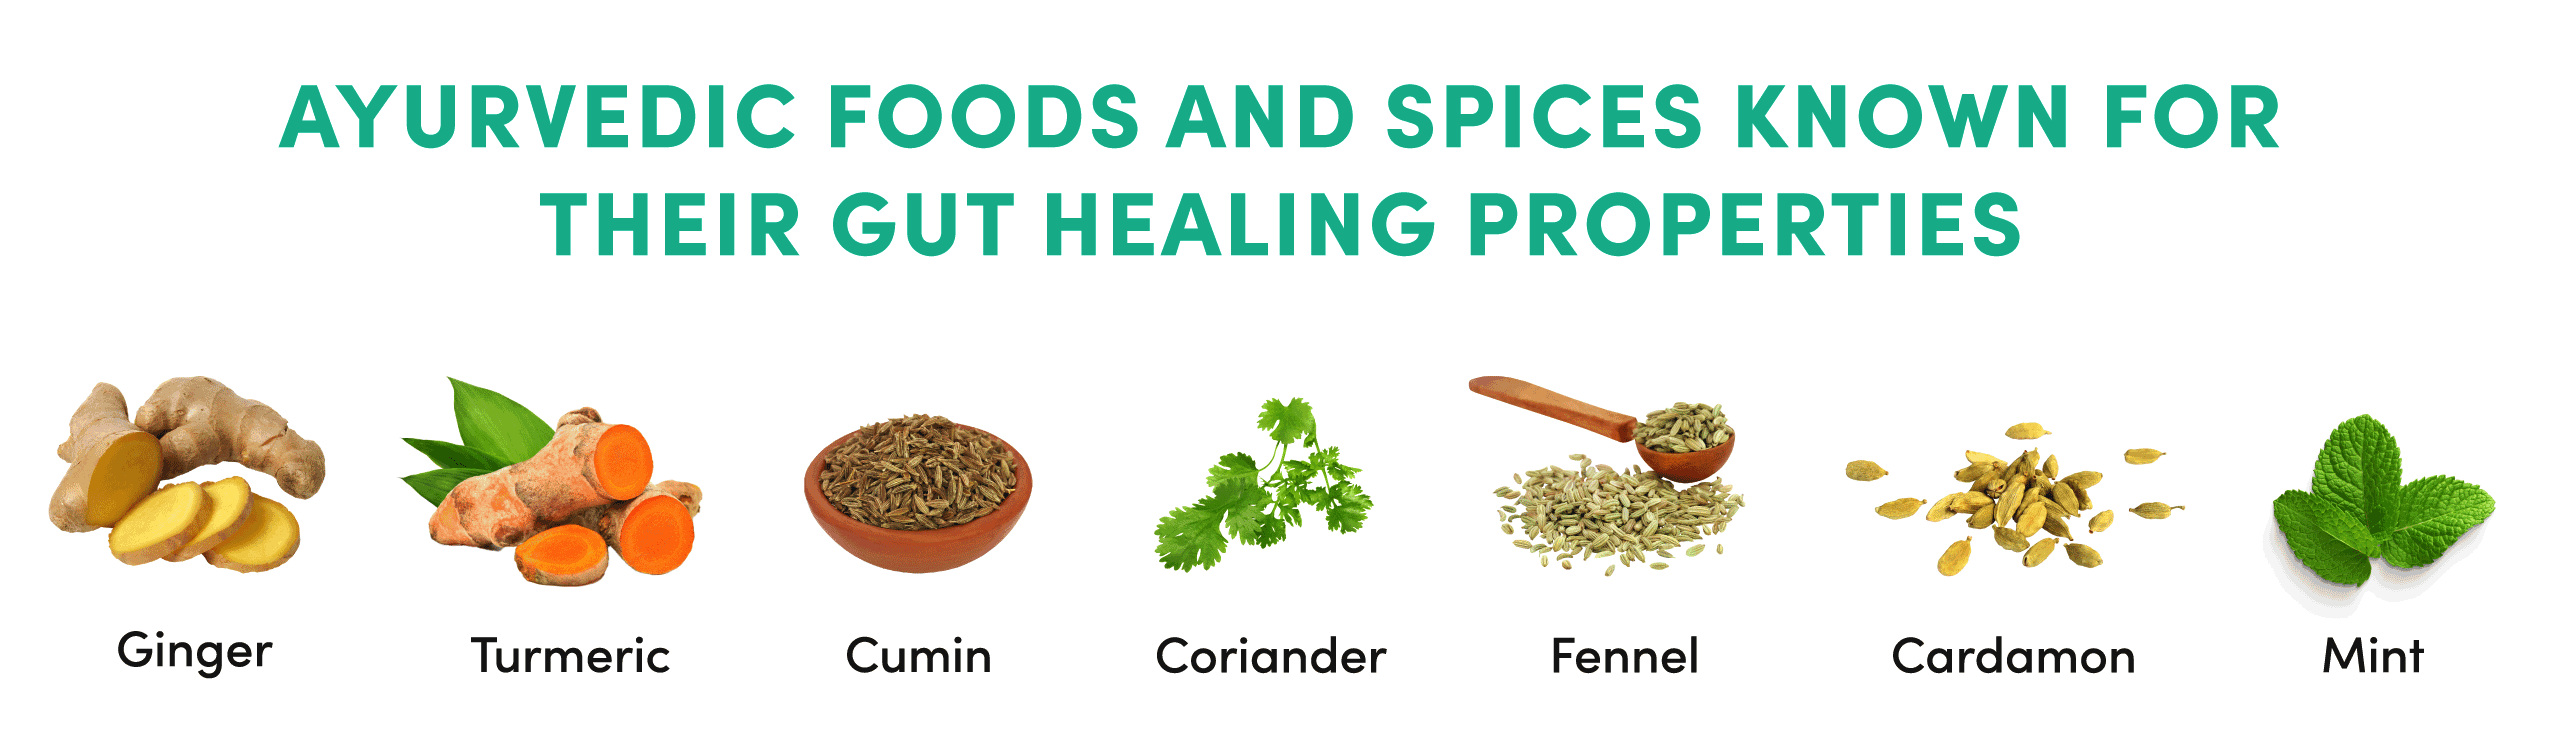 Ayurvedic foods and spices for gut healing